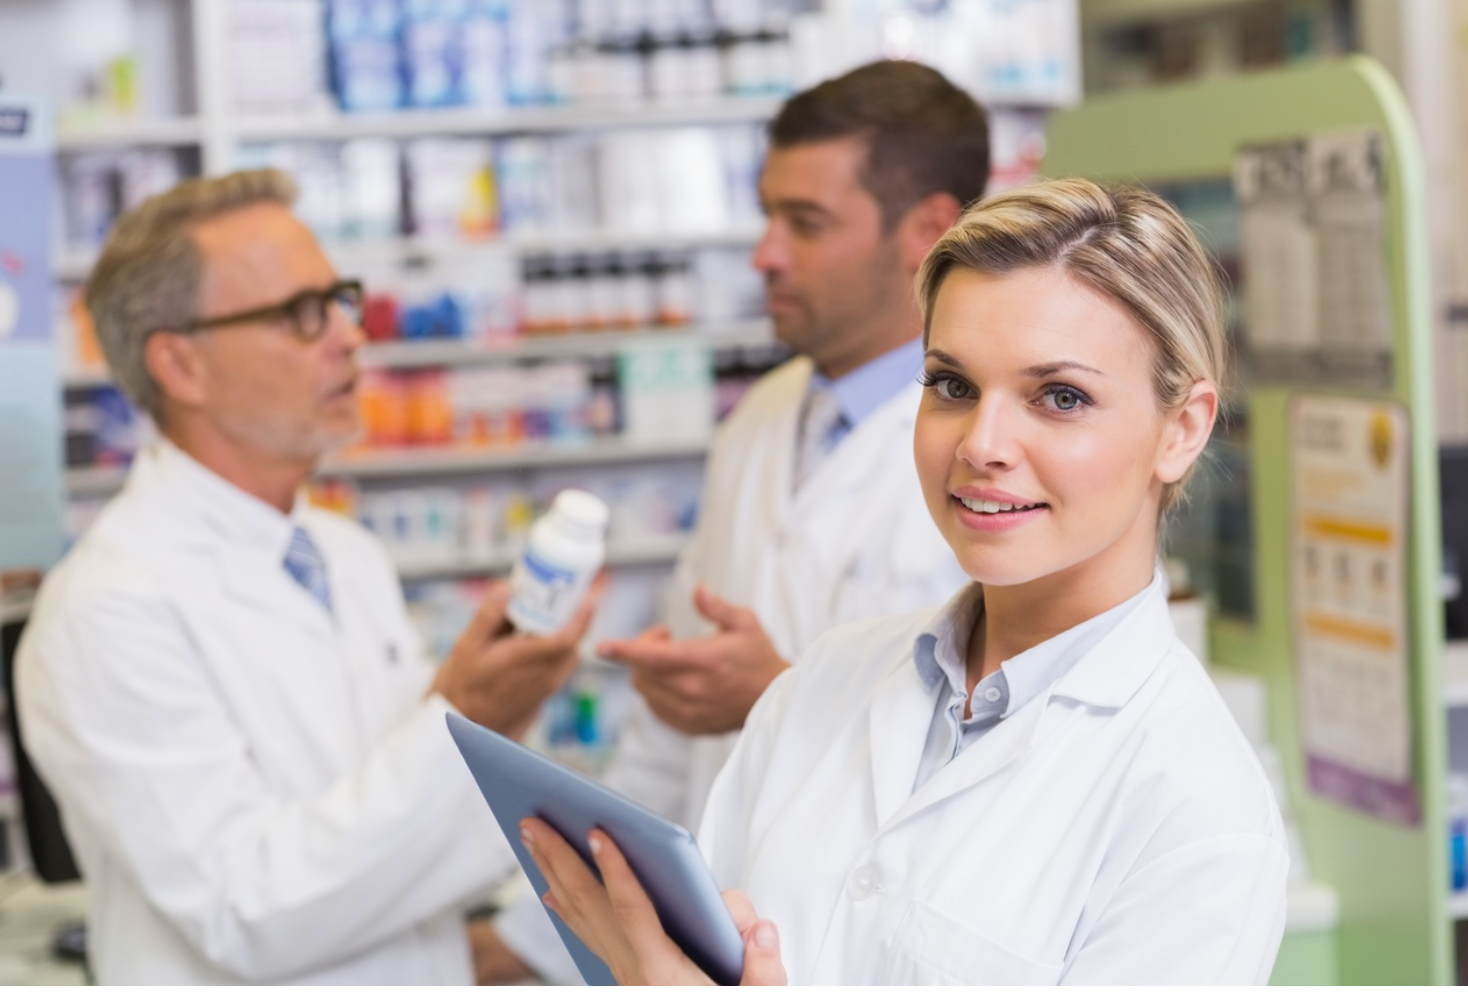 Technicians Provide Critical Support to the Pharmacy Profession, But They Need Support Too 